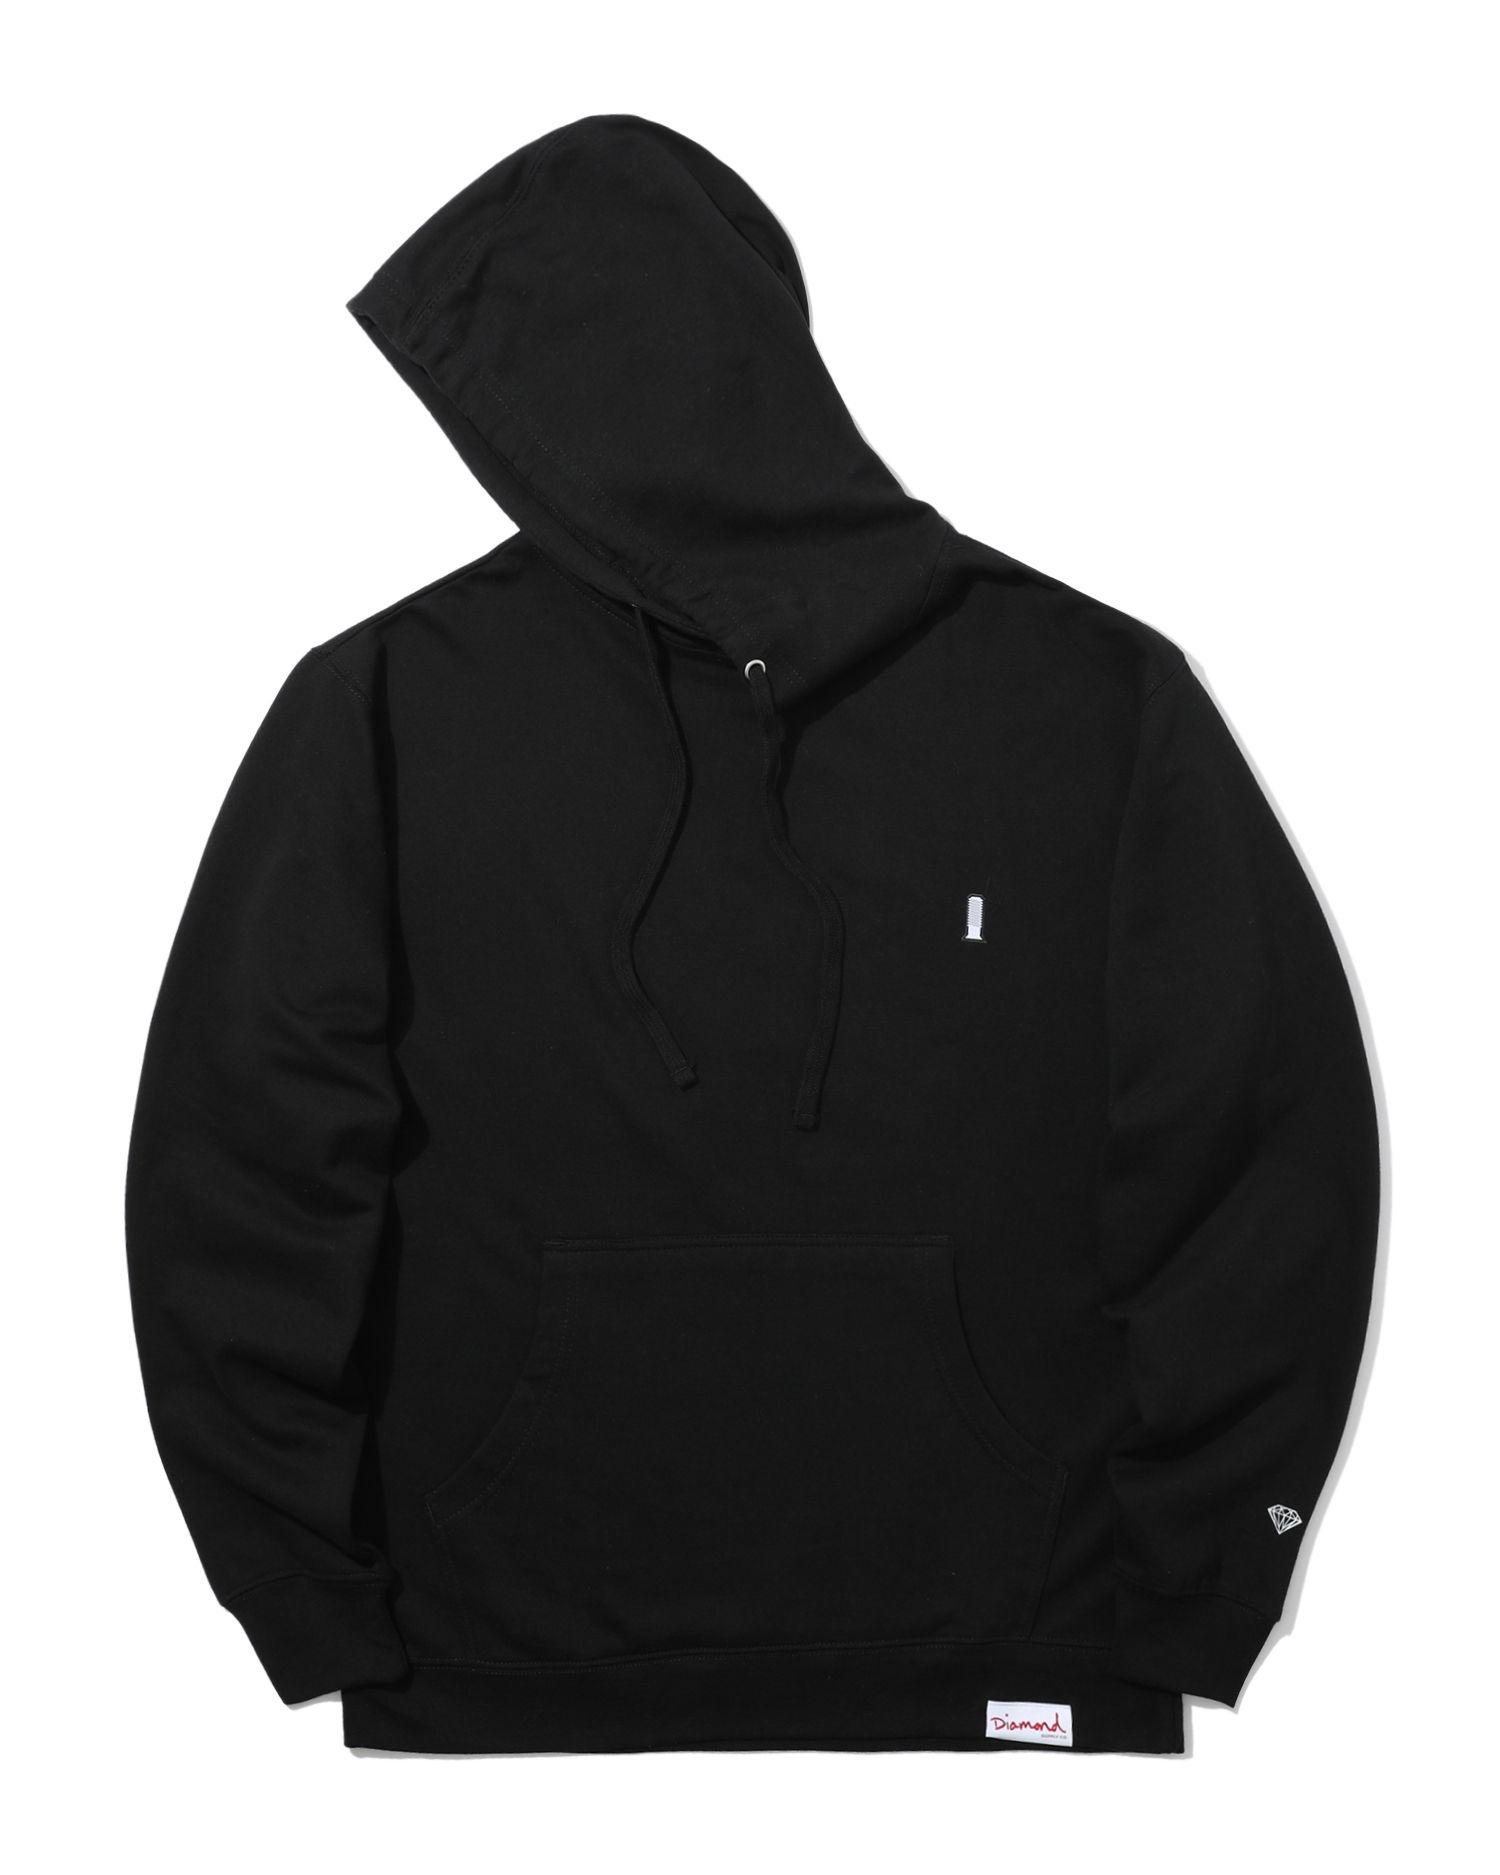 Secured hoodie by DIAMOND SUPPLY CO.